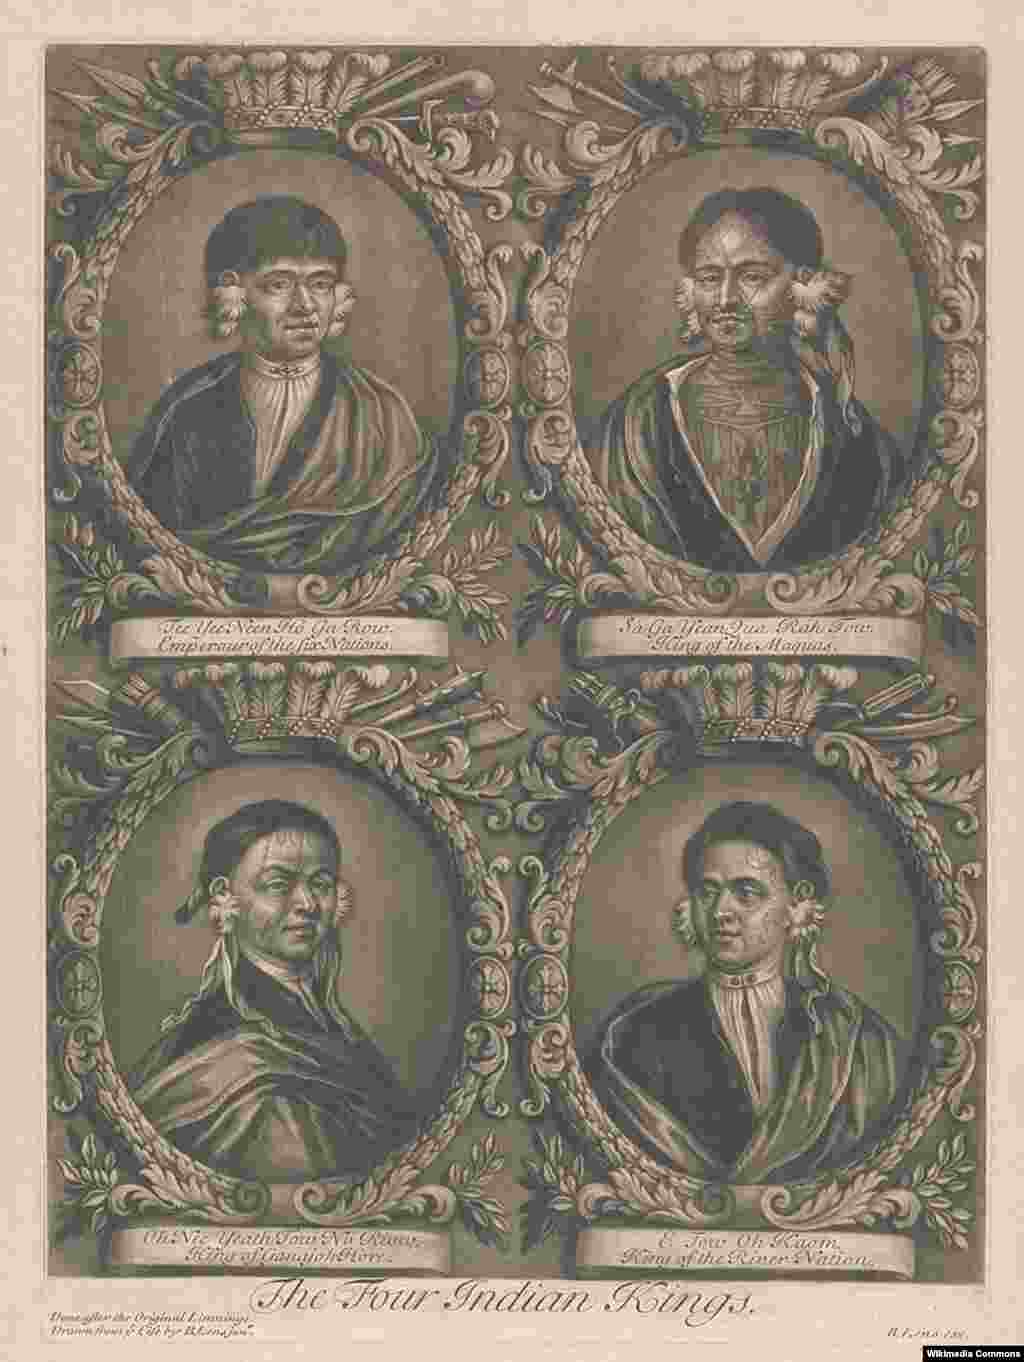 Print by Bernard Lens II shows three Mohawk and a Mahican leaders with face tattoos during their 1710 diplomatic mission to London.